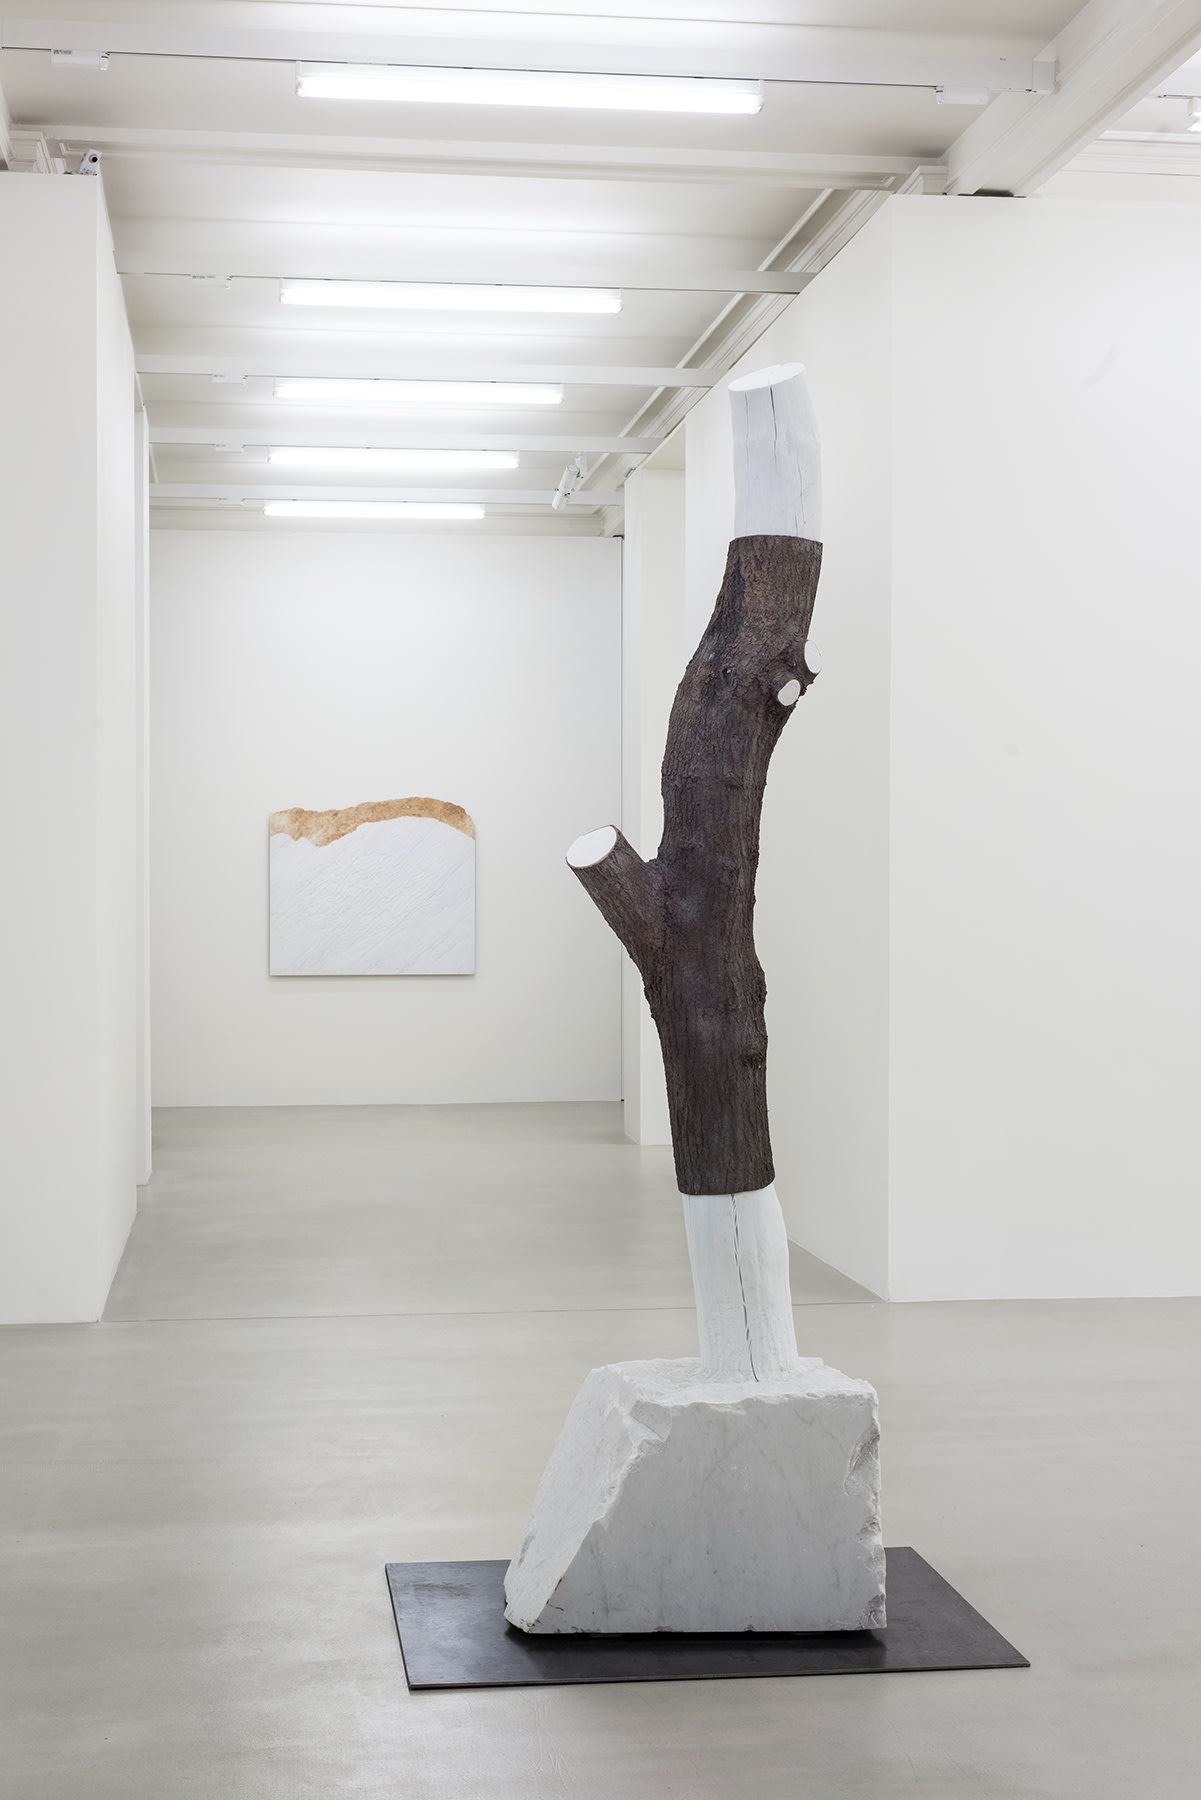 A sculpture of the cut section of a tree trunk sits in the center of the gallery.